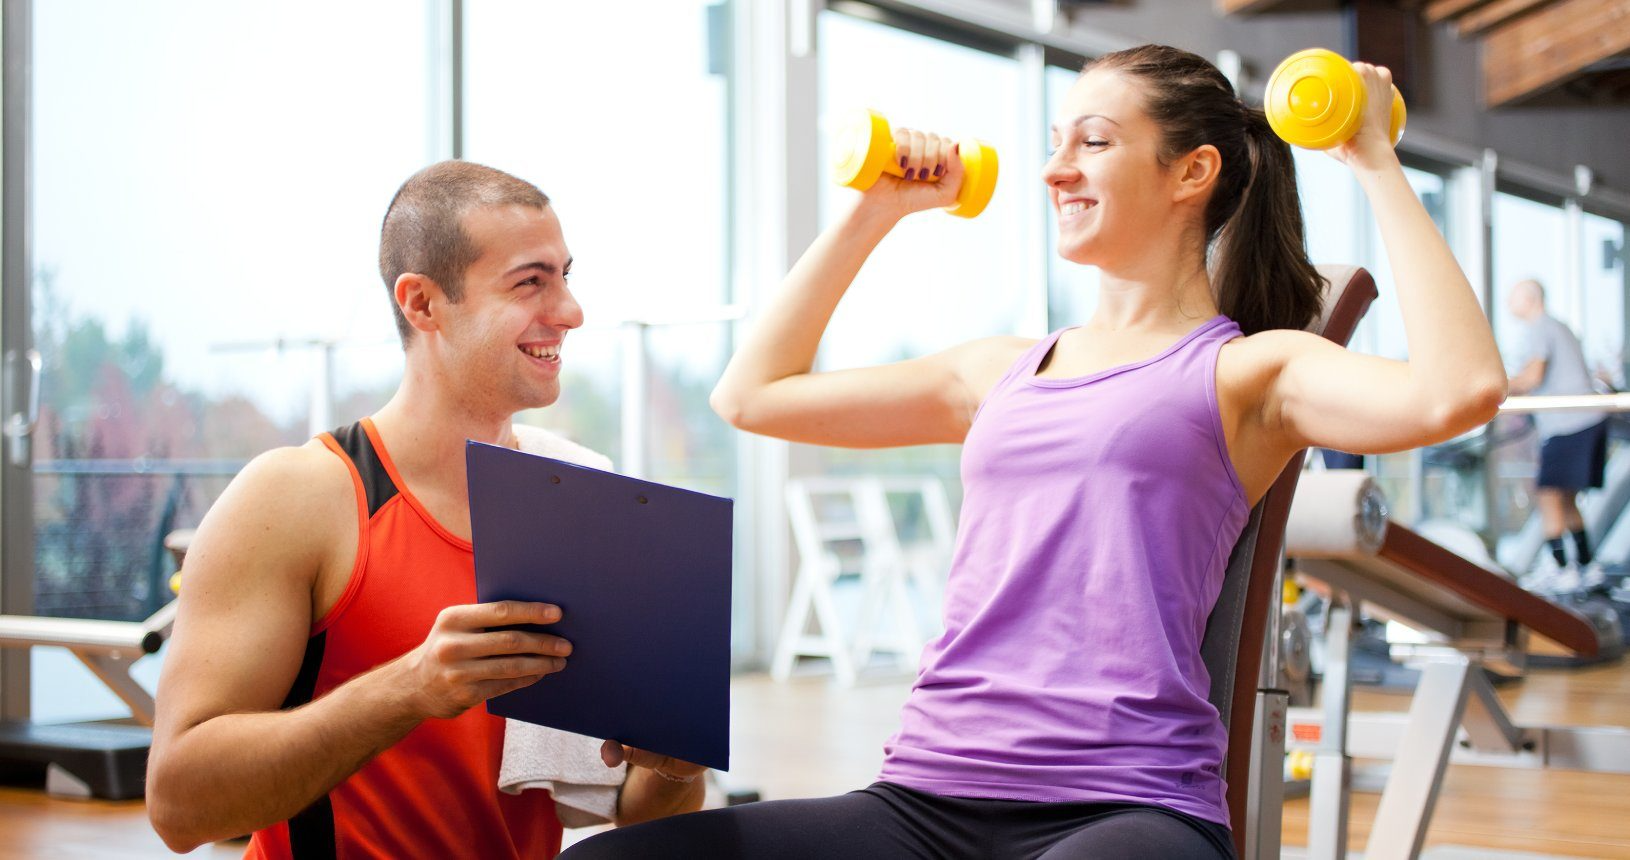 Personal Training And Physical Therapy: A Powerful Duo For NYC Professionals